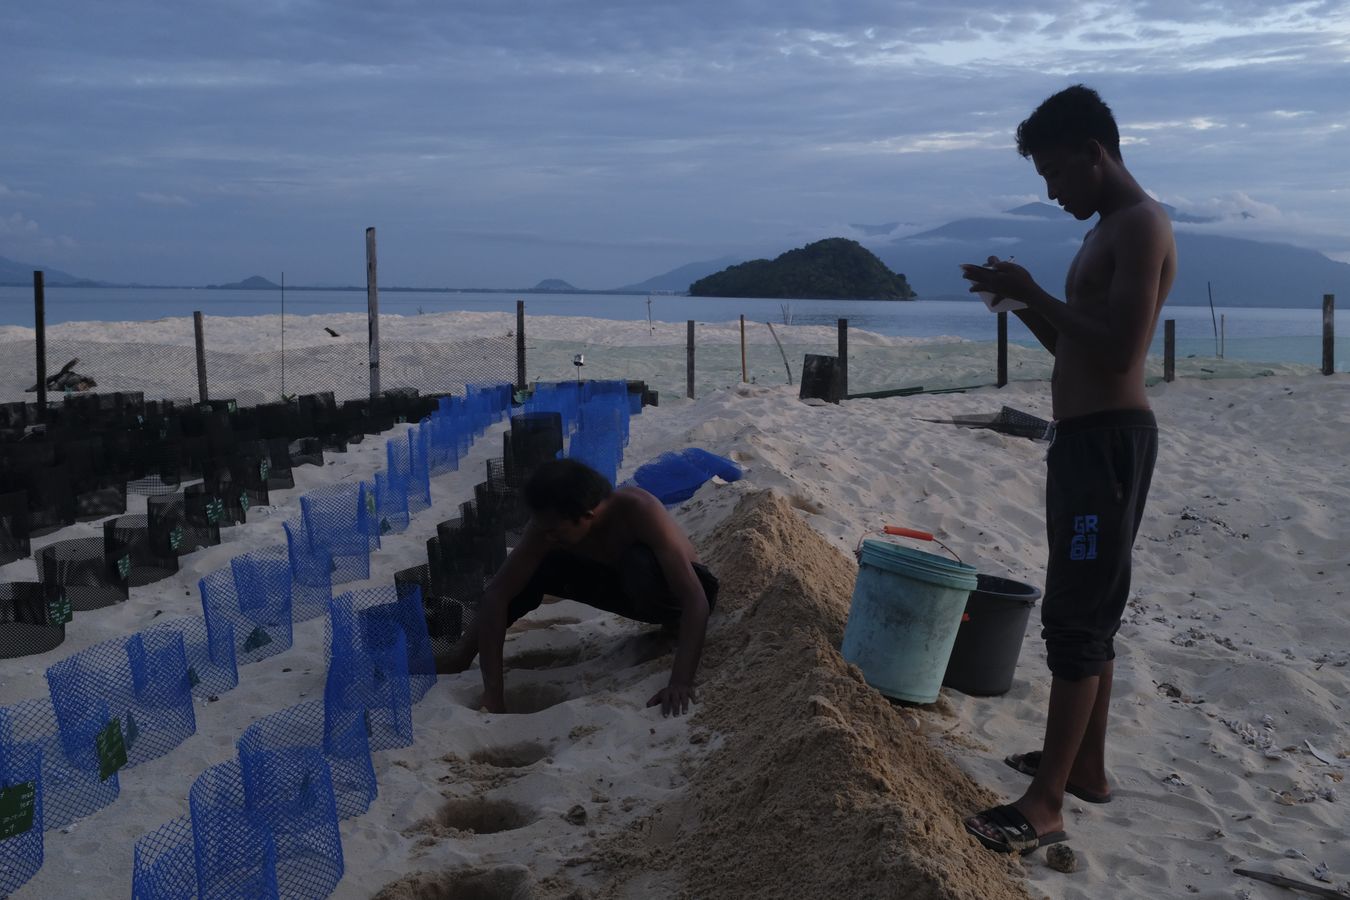 Ranger places green turtles eggs in their new hatchery nests while his assistant records the number of eggs in each nest.